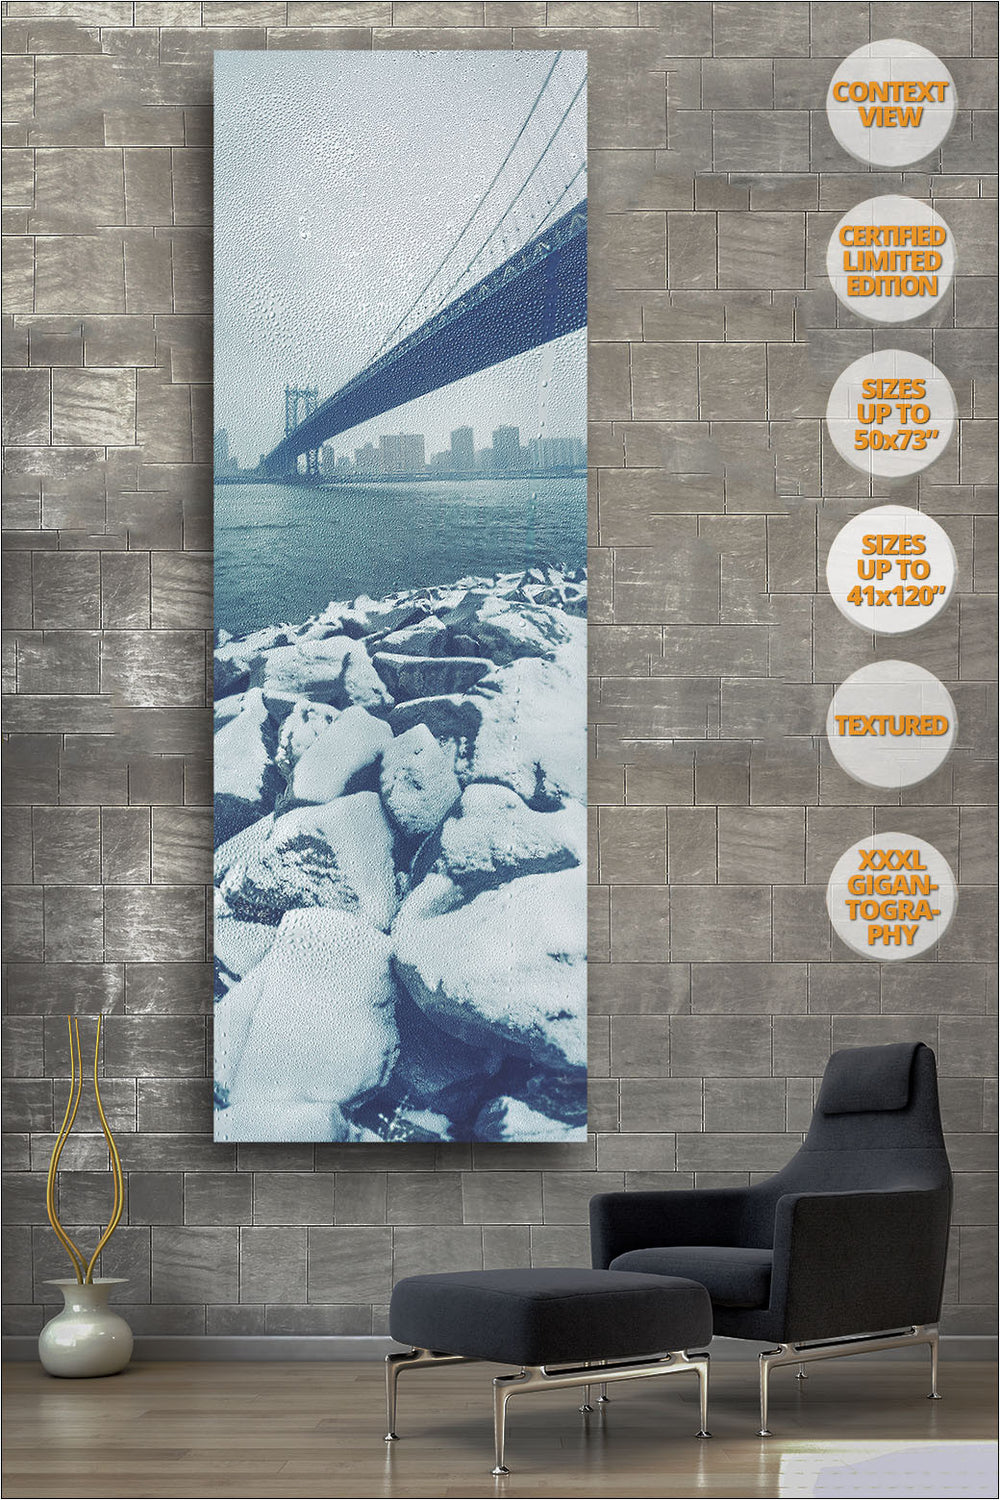 Manhattan Bridge in Blizzard, Winter, New York. | View of the Print hanged in Reading Room.